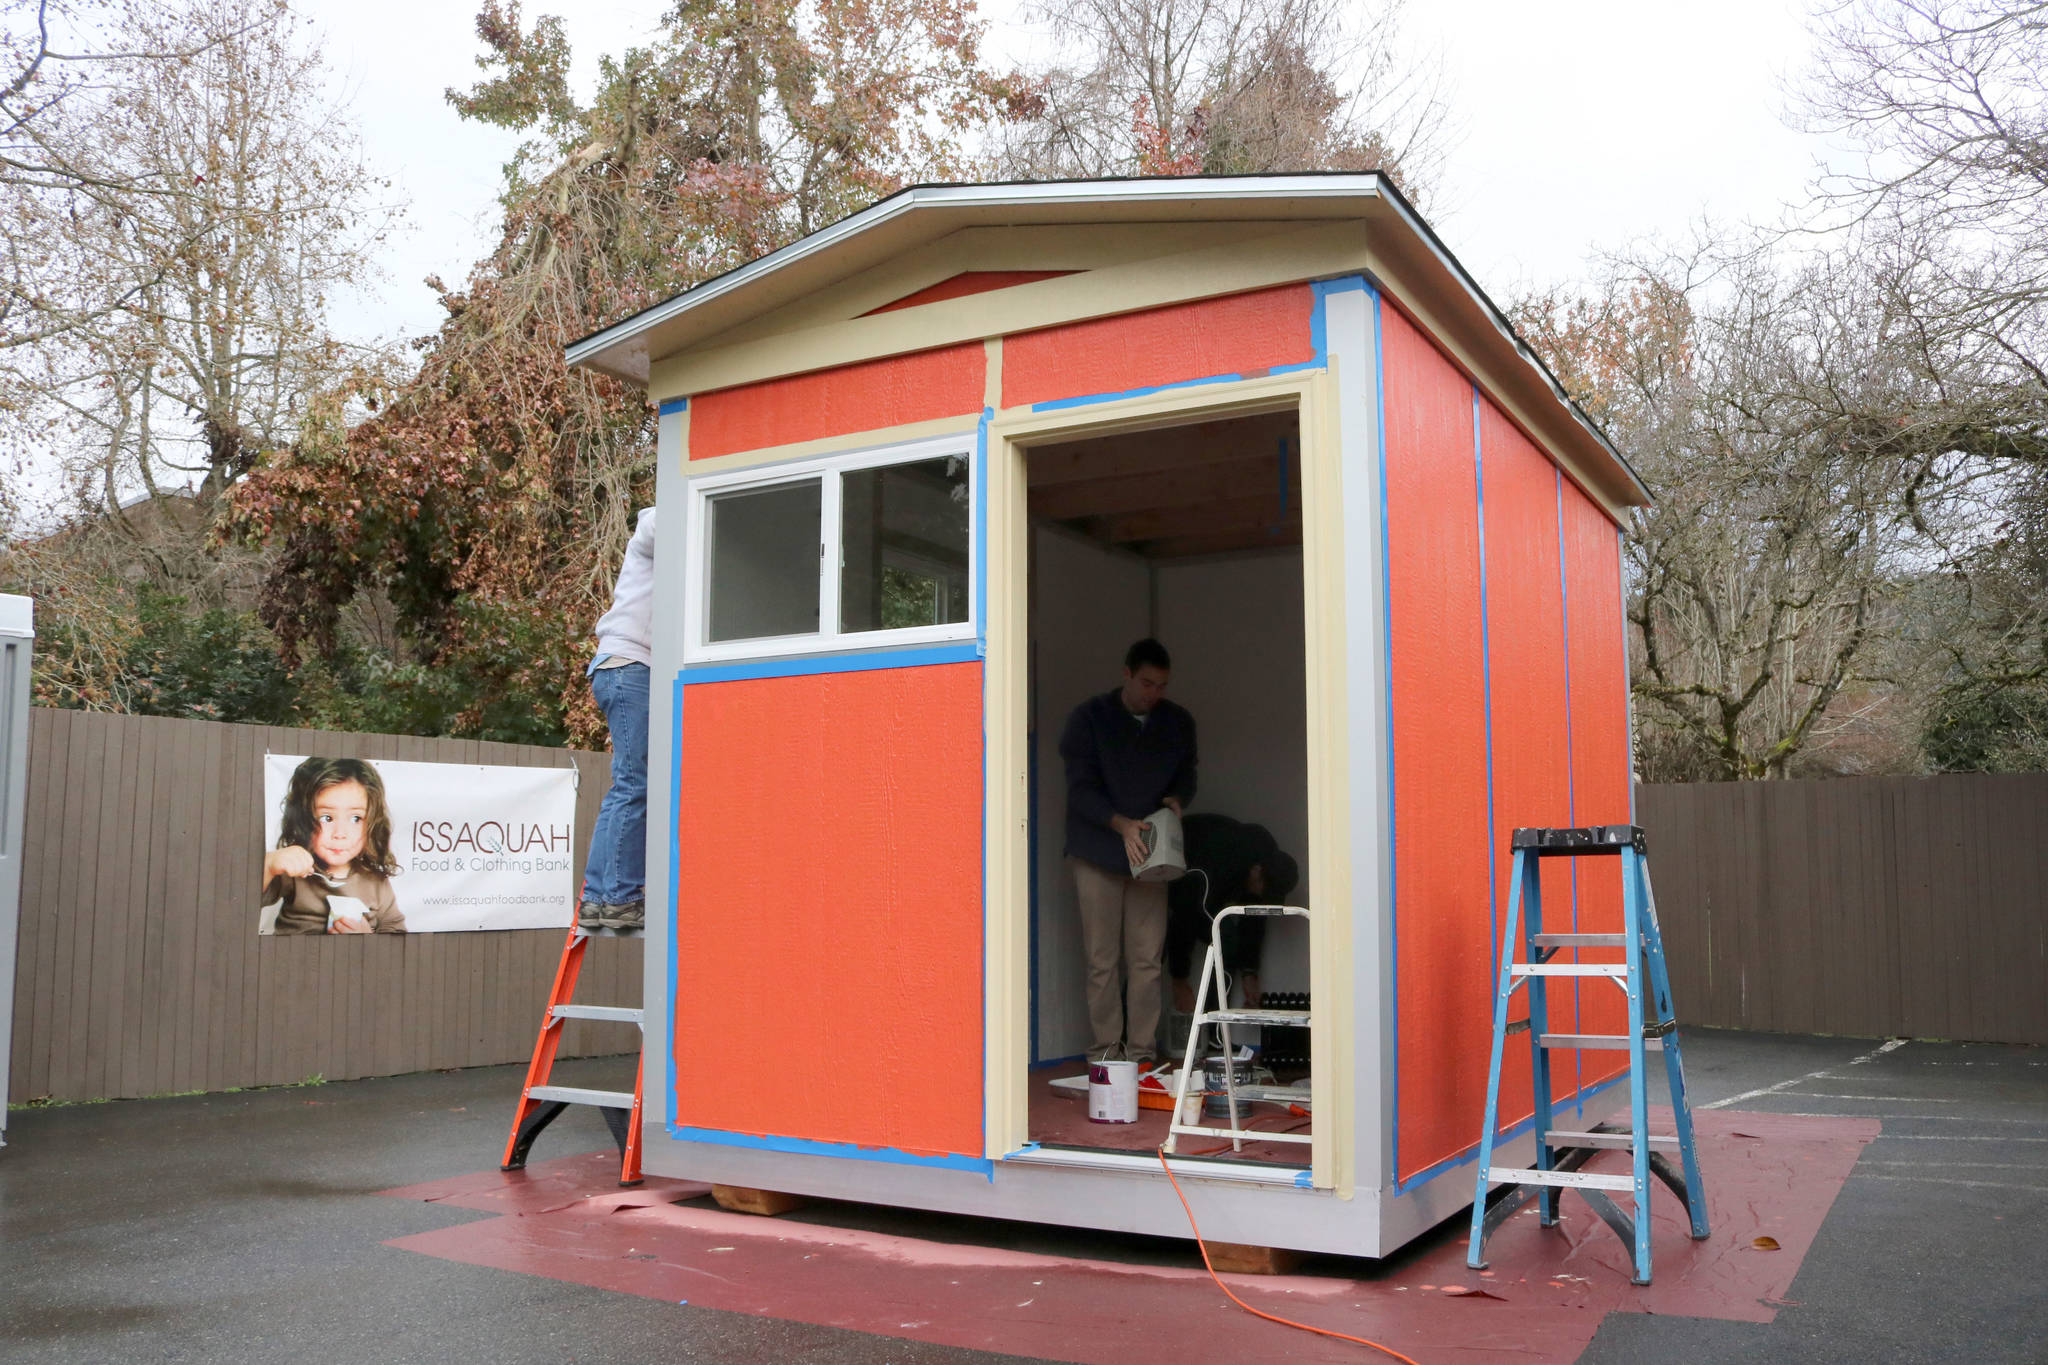 Volunteers in Issaquah finish a tiny house last December before donating it to the Low Income Housing Institute’s newest village for homeless residents in Olympia. The 8-foot by 12-foot house featured insulation, electricity, heat, windows, and a lockable door. Evan Pappas/Staff photo